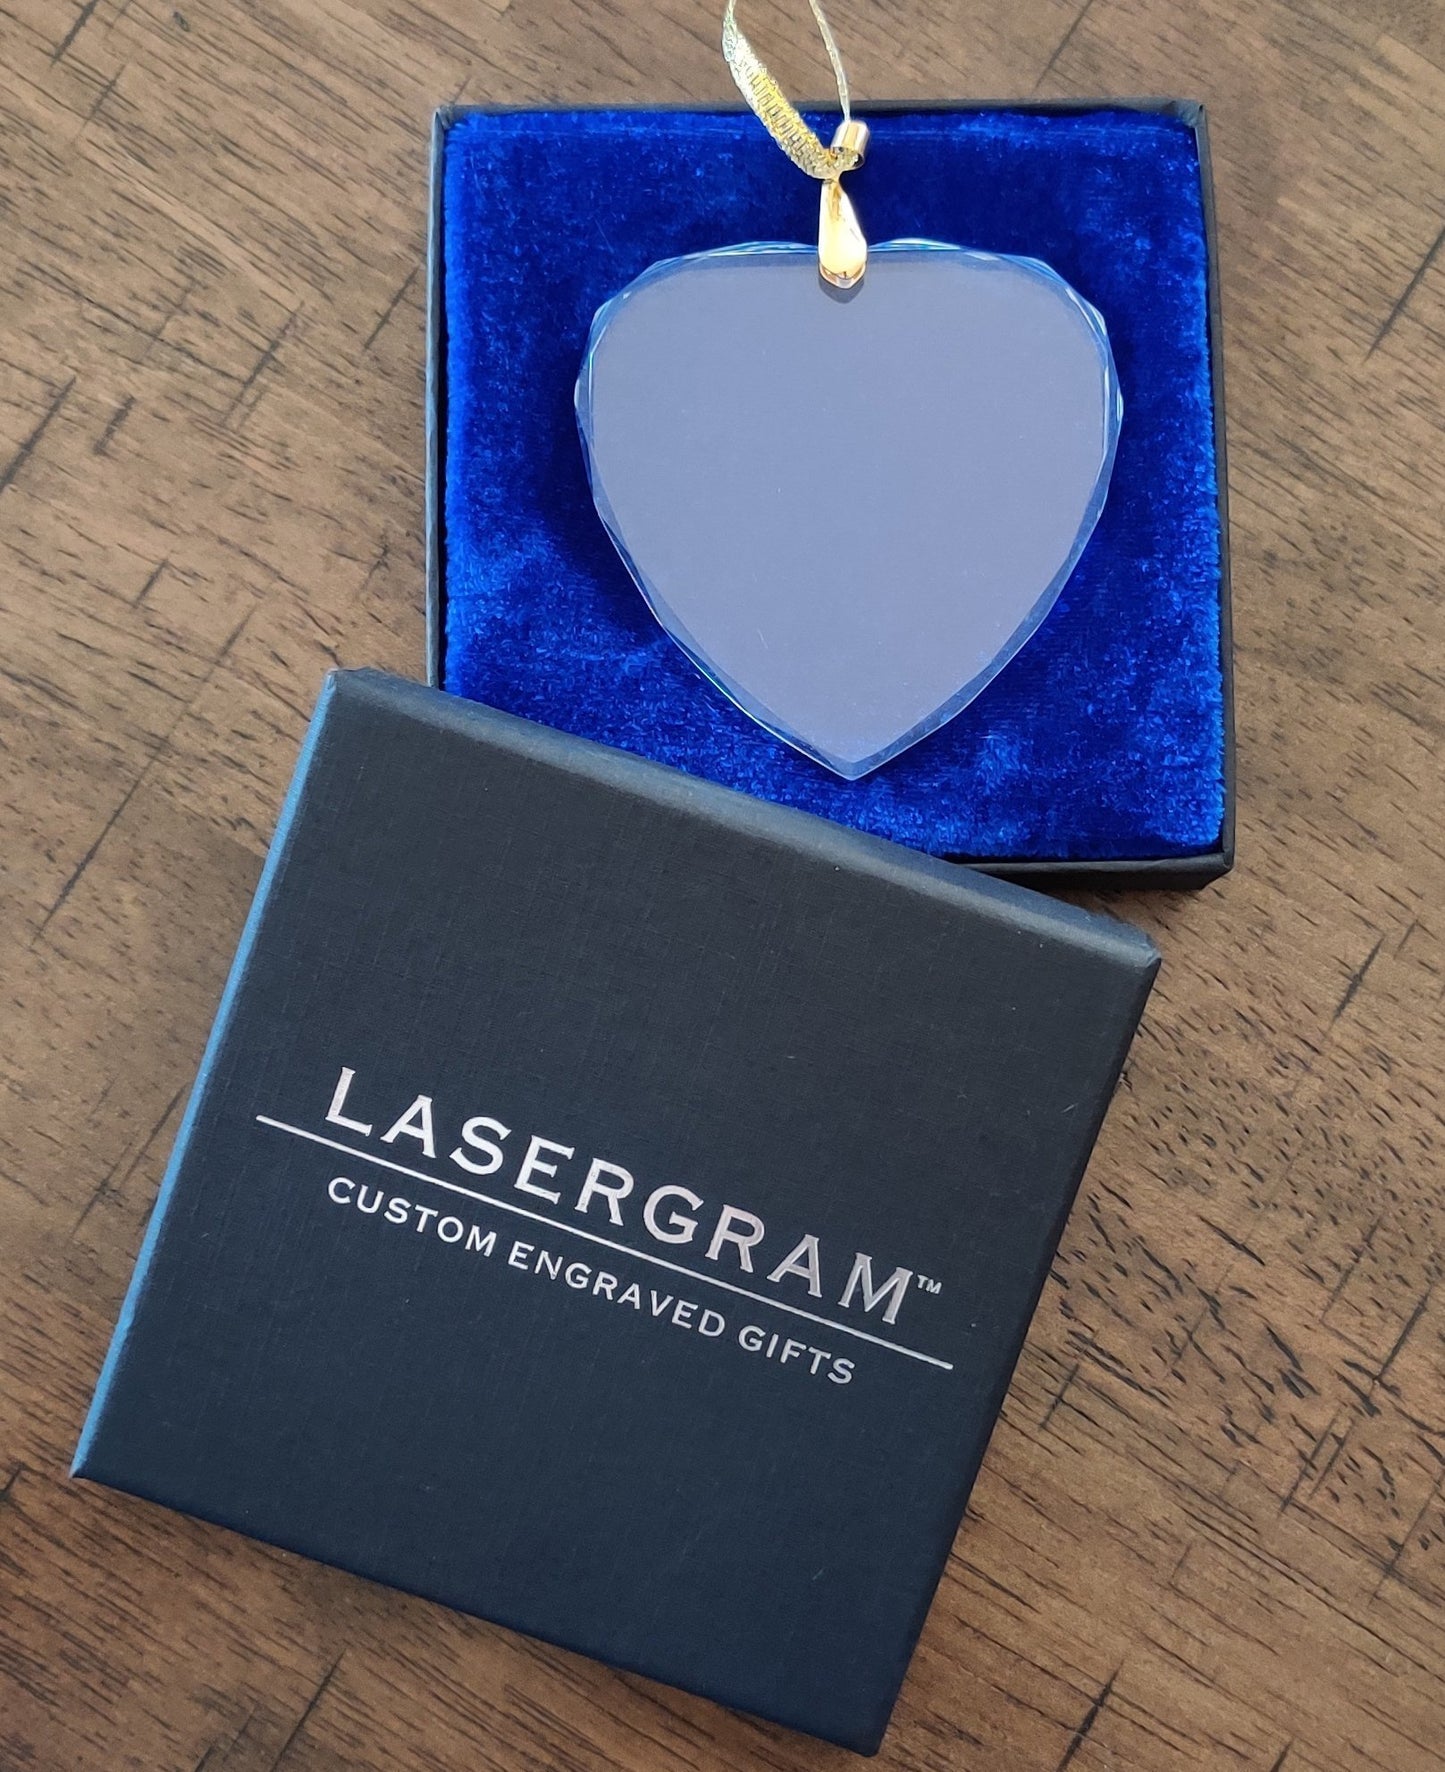 LaserGram Christmas Ornament, Chess King, Personalized Engraving Included (Heart Shape)